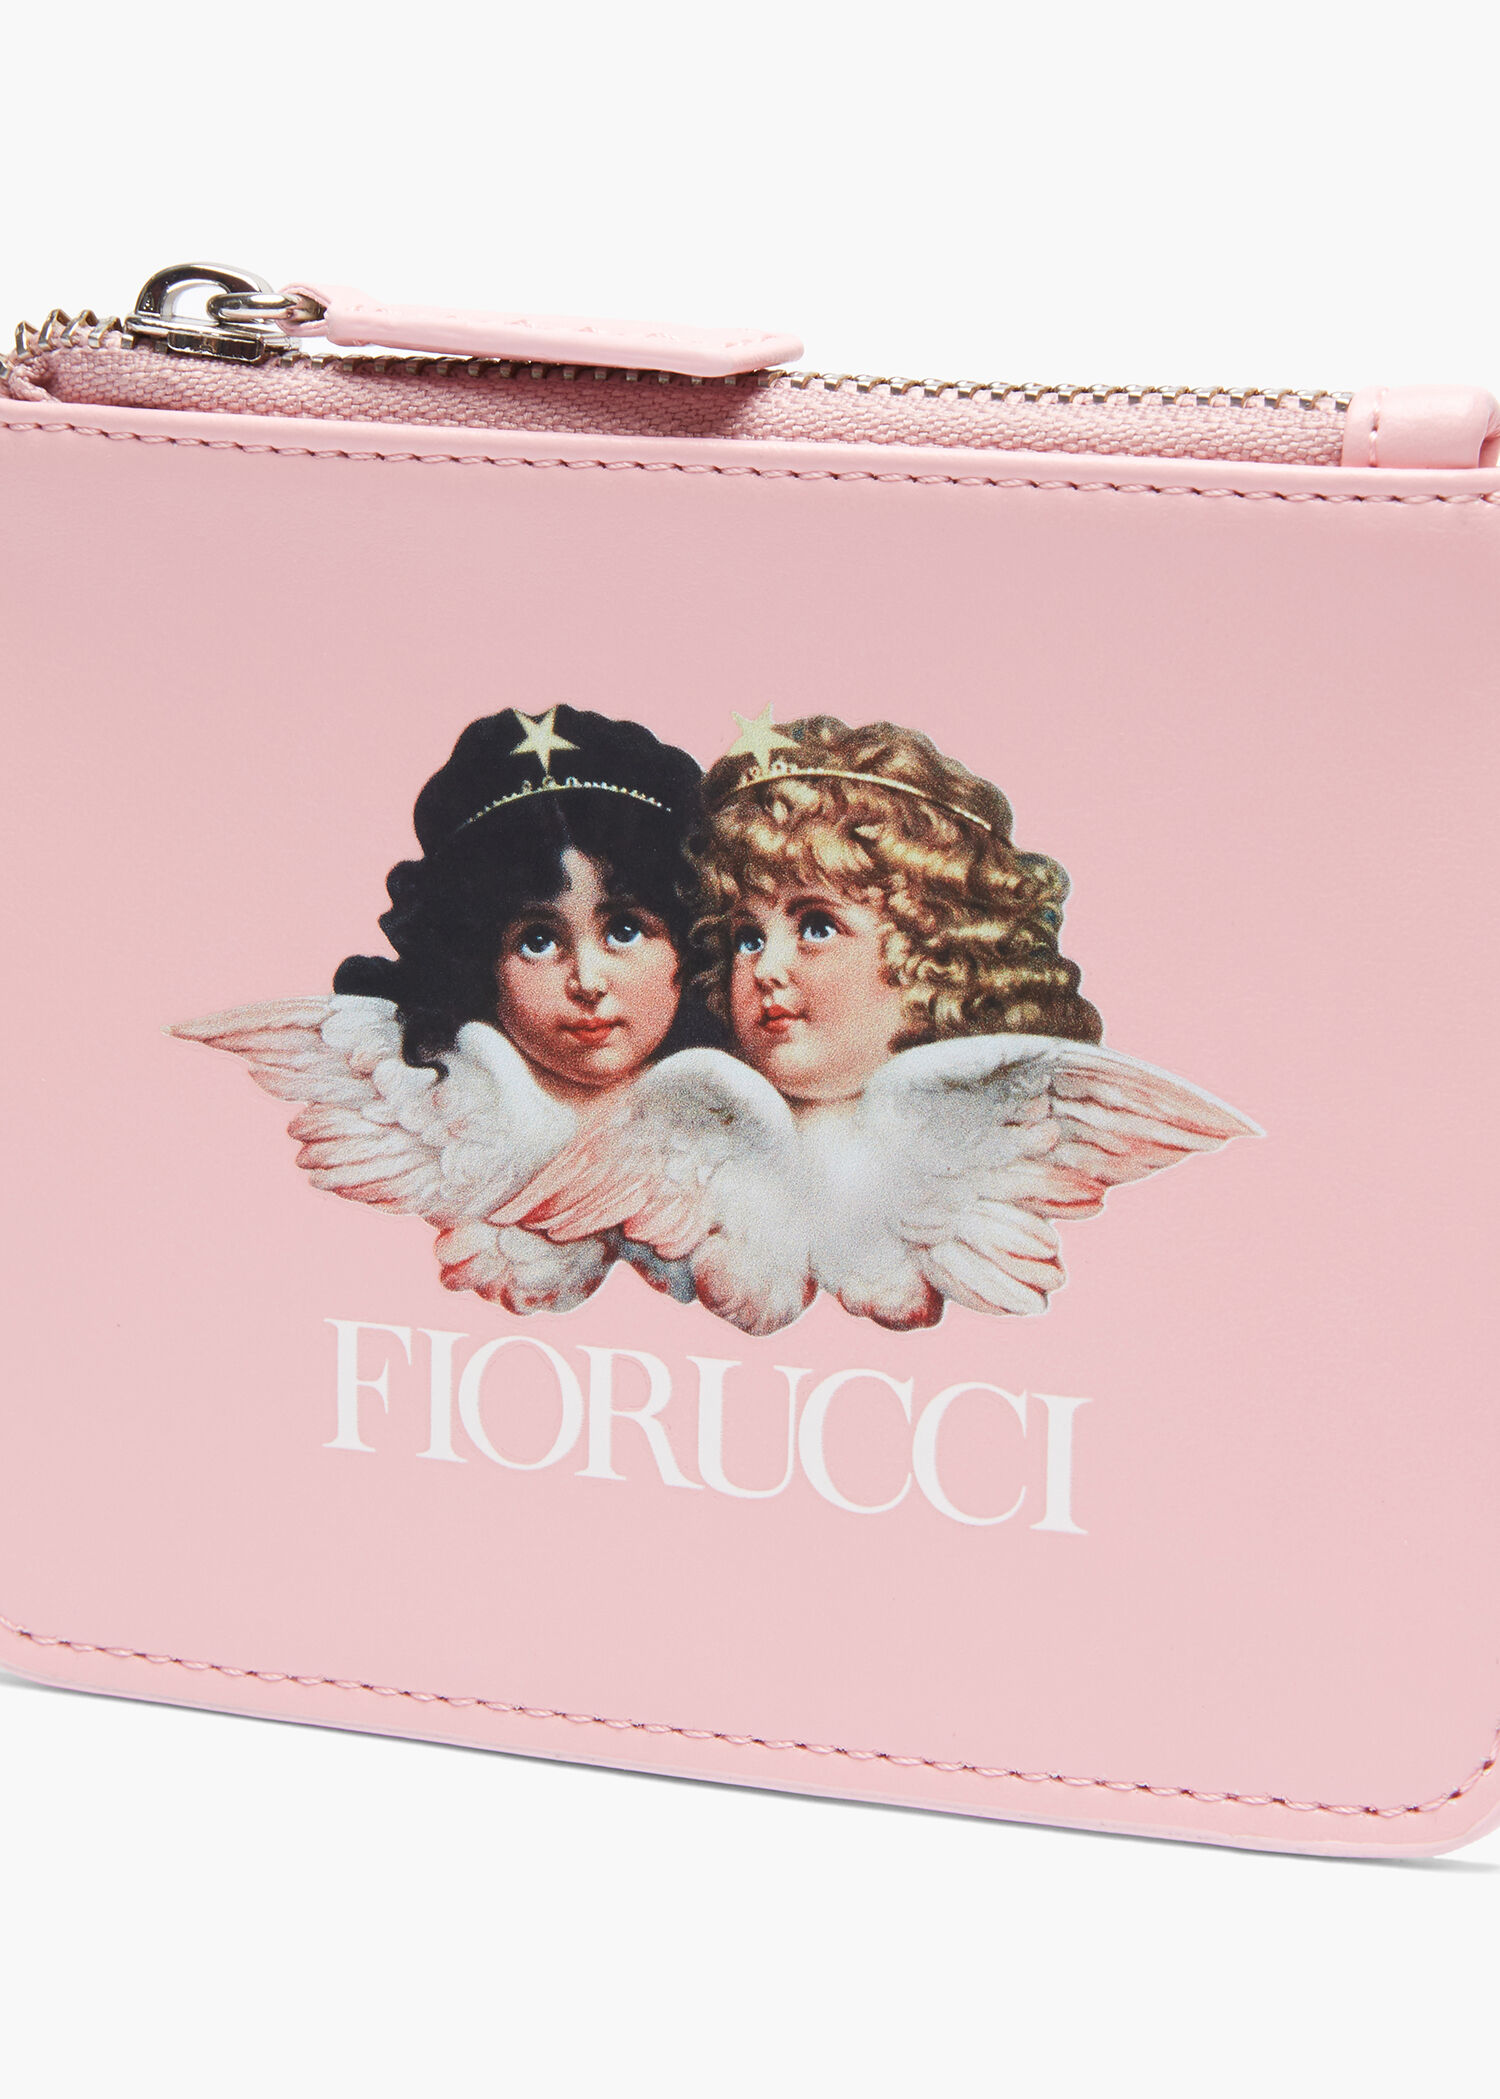 Angels Mini Coin Purse Pink